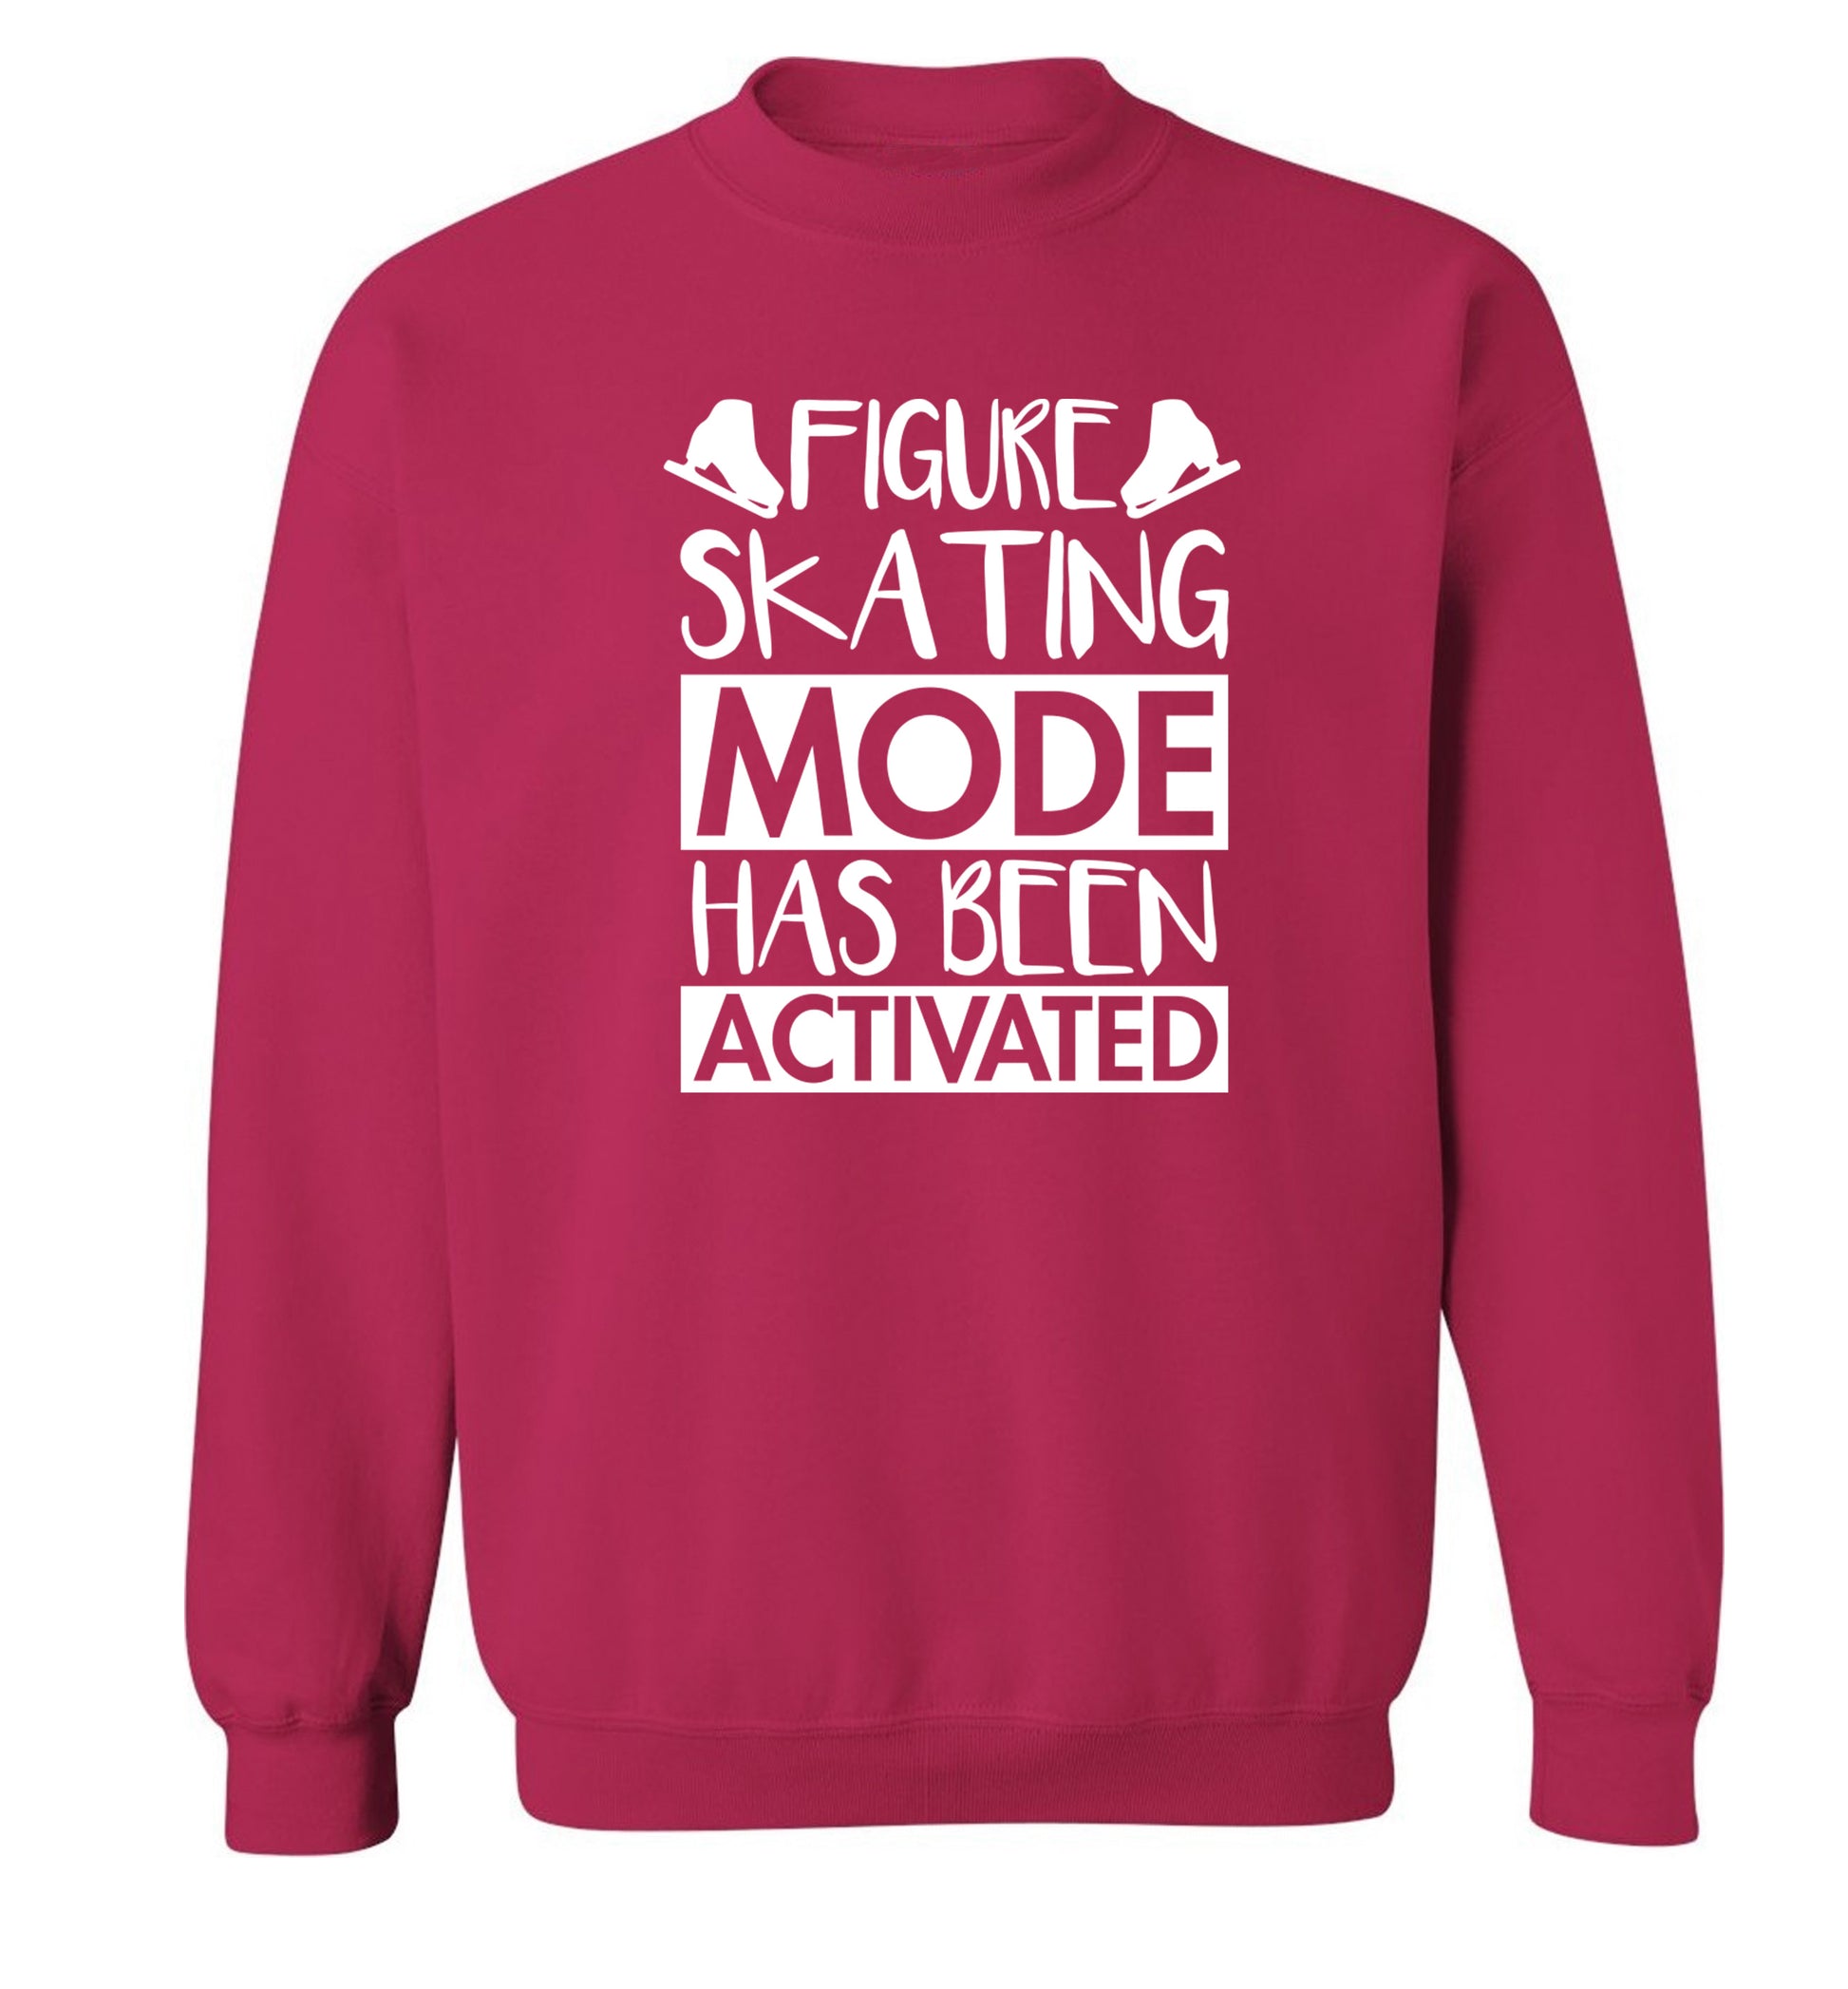 Figure skating mode activated Adult's unisexpink Sweater 2XL